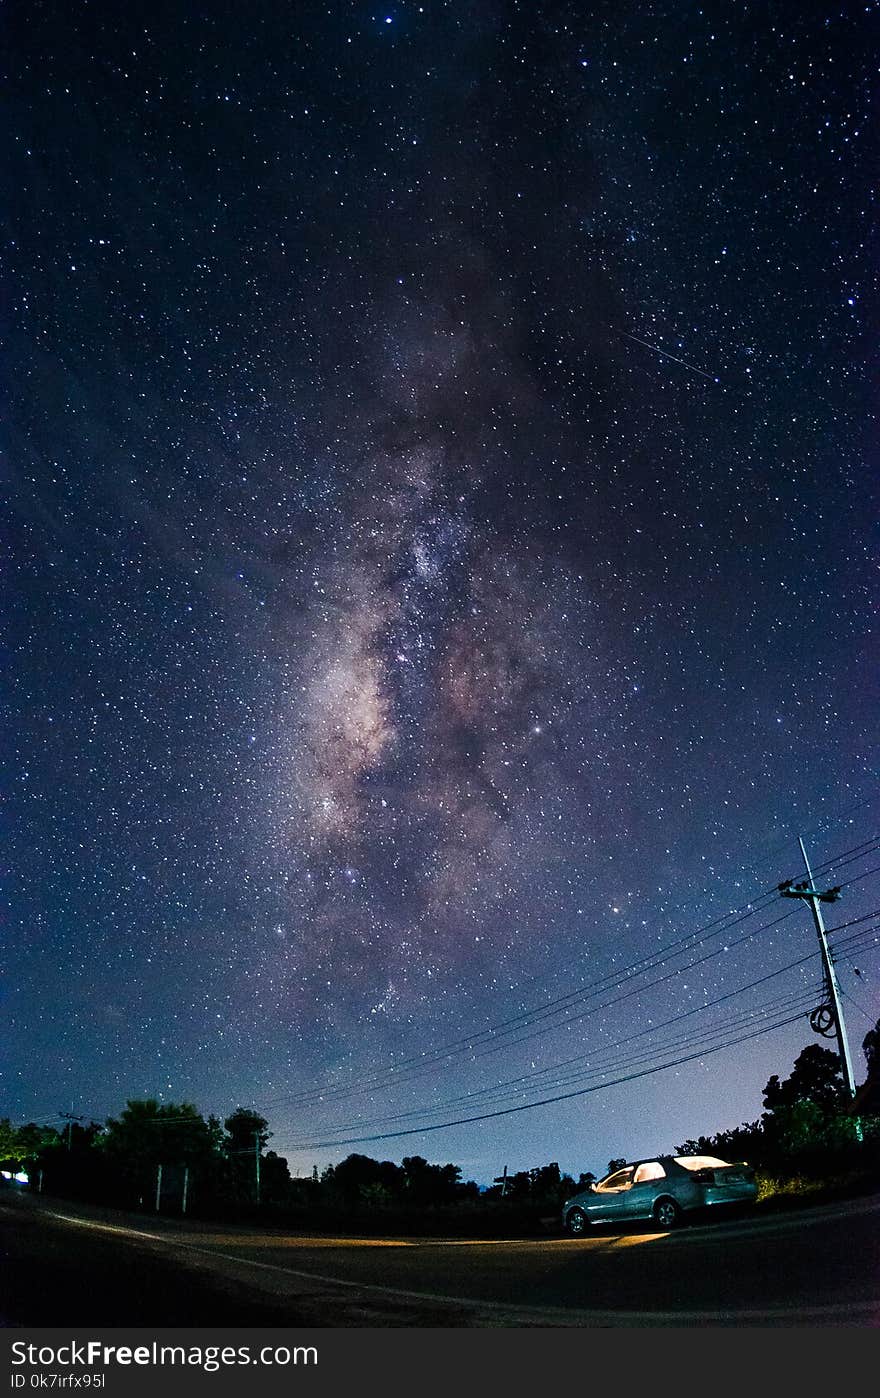 The Milky Way with the tree and car in foreground